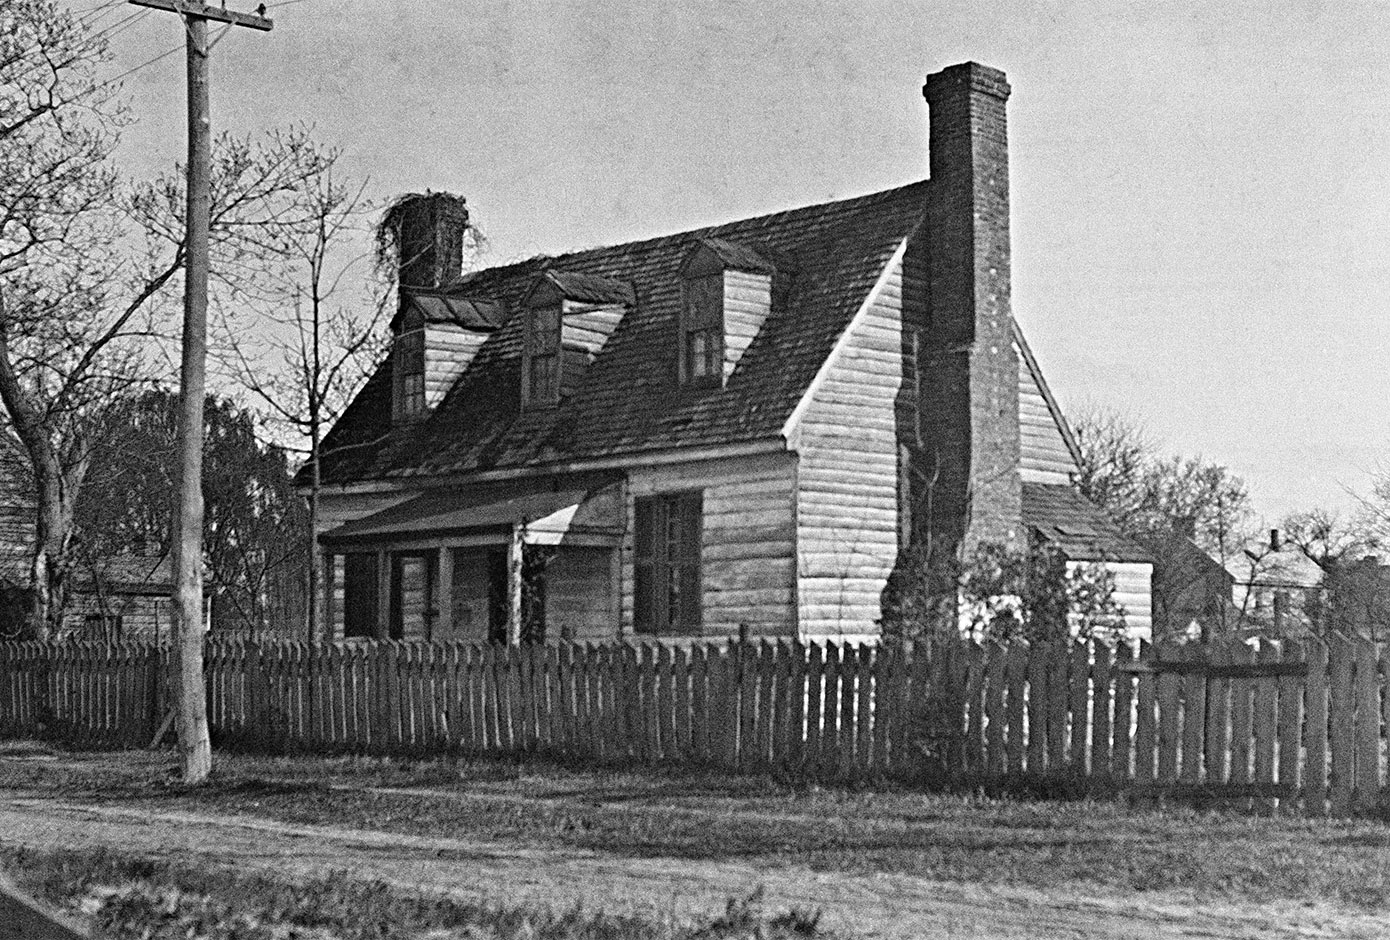 Front elevation of the Dudley Digges House in its original location on Prince George Street, Williamsburg, Virginia.